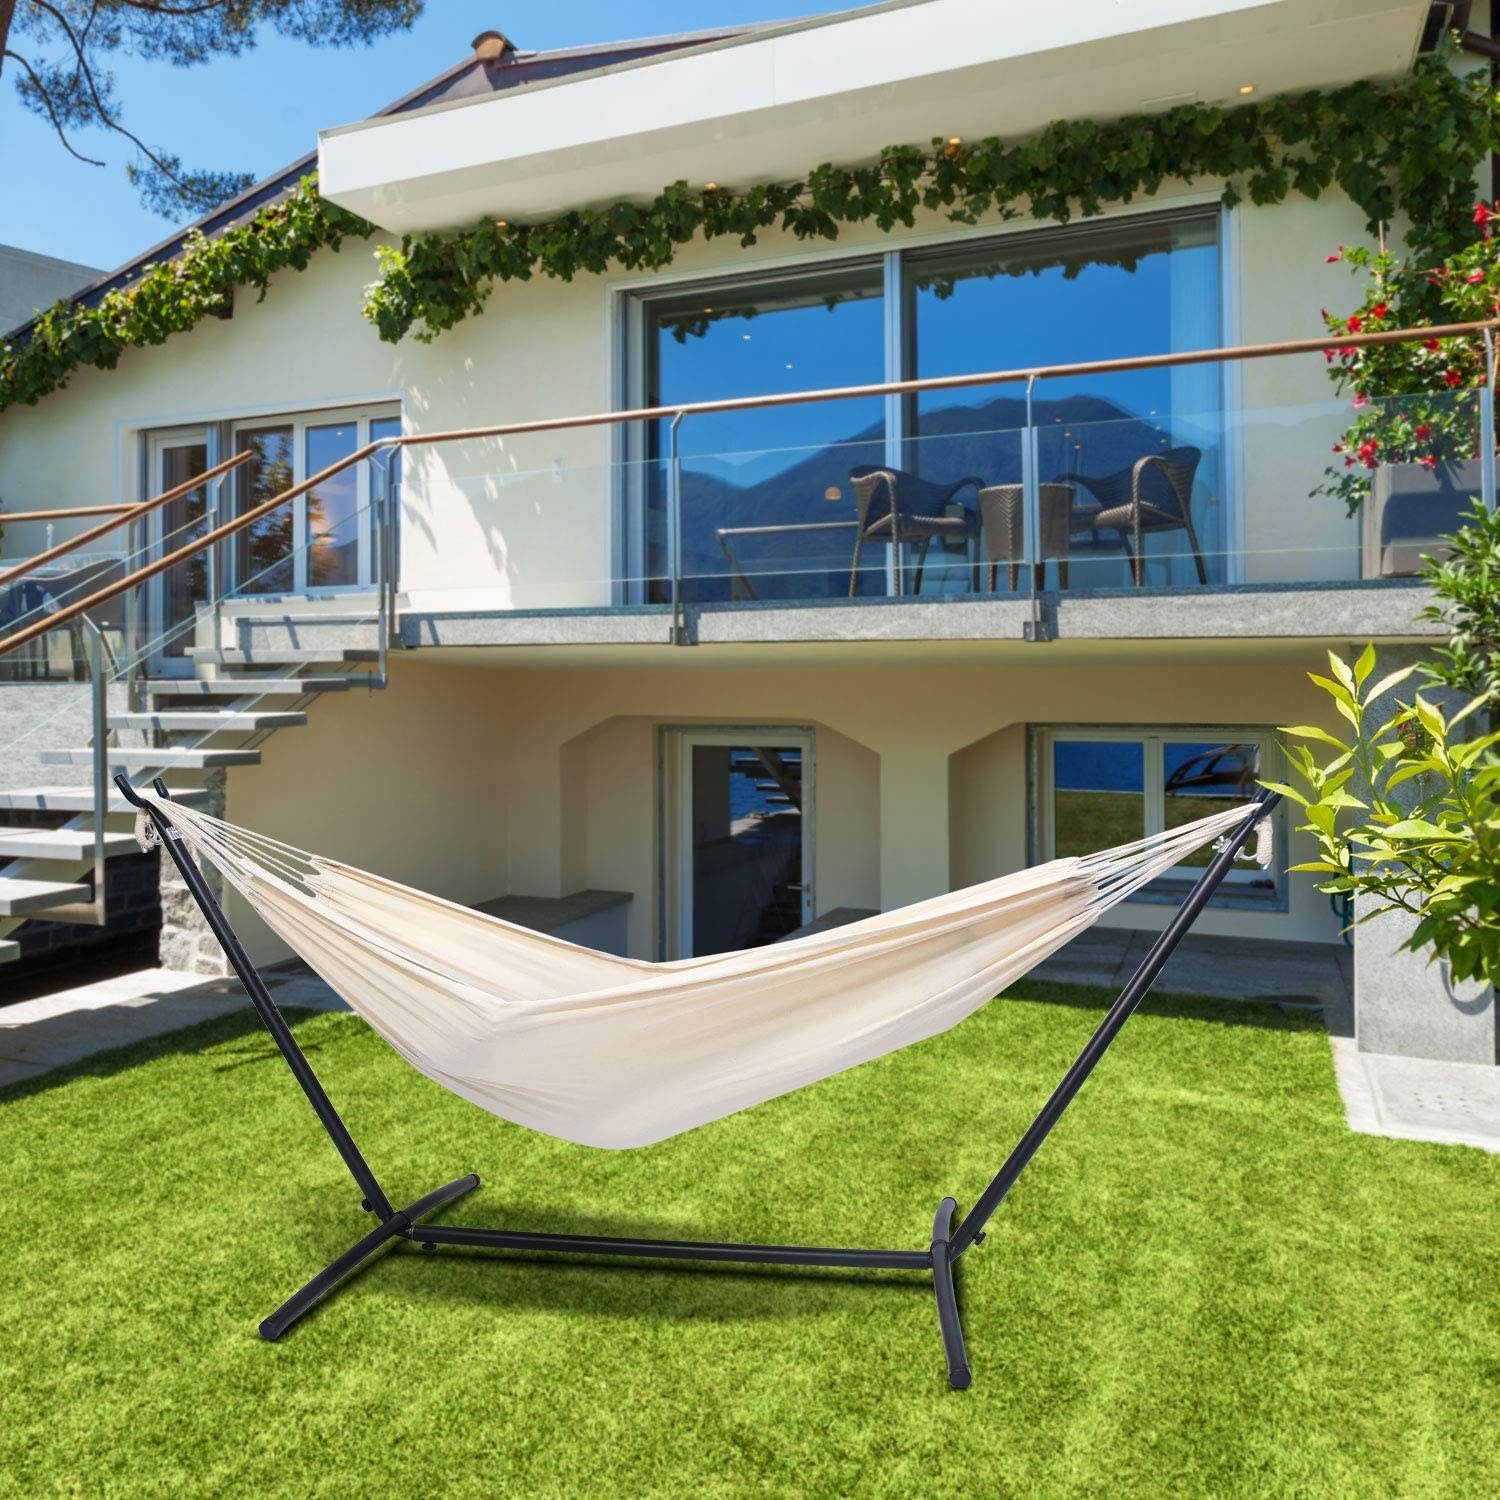 The hammock in the yard of a house